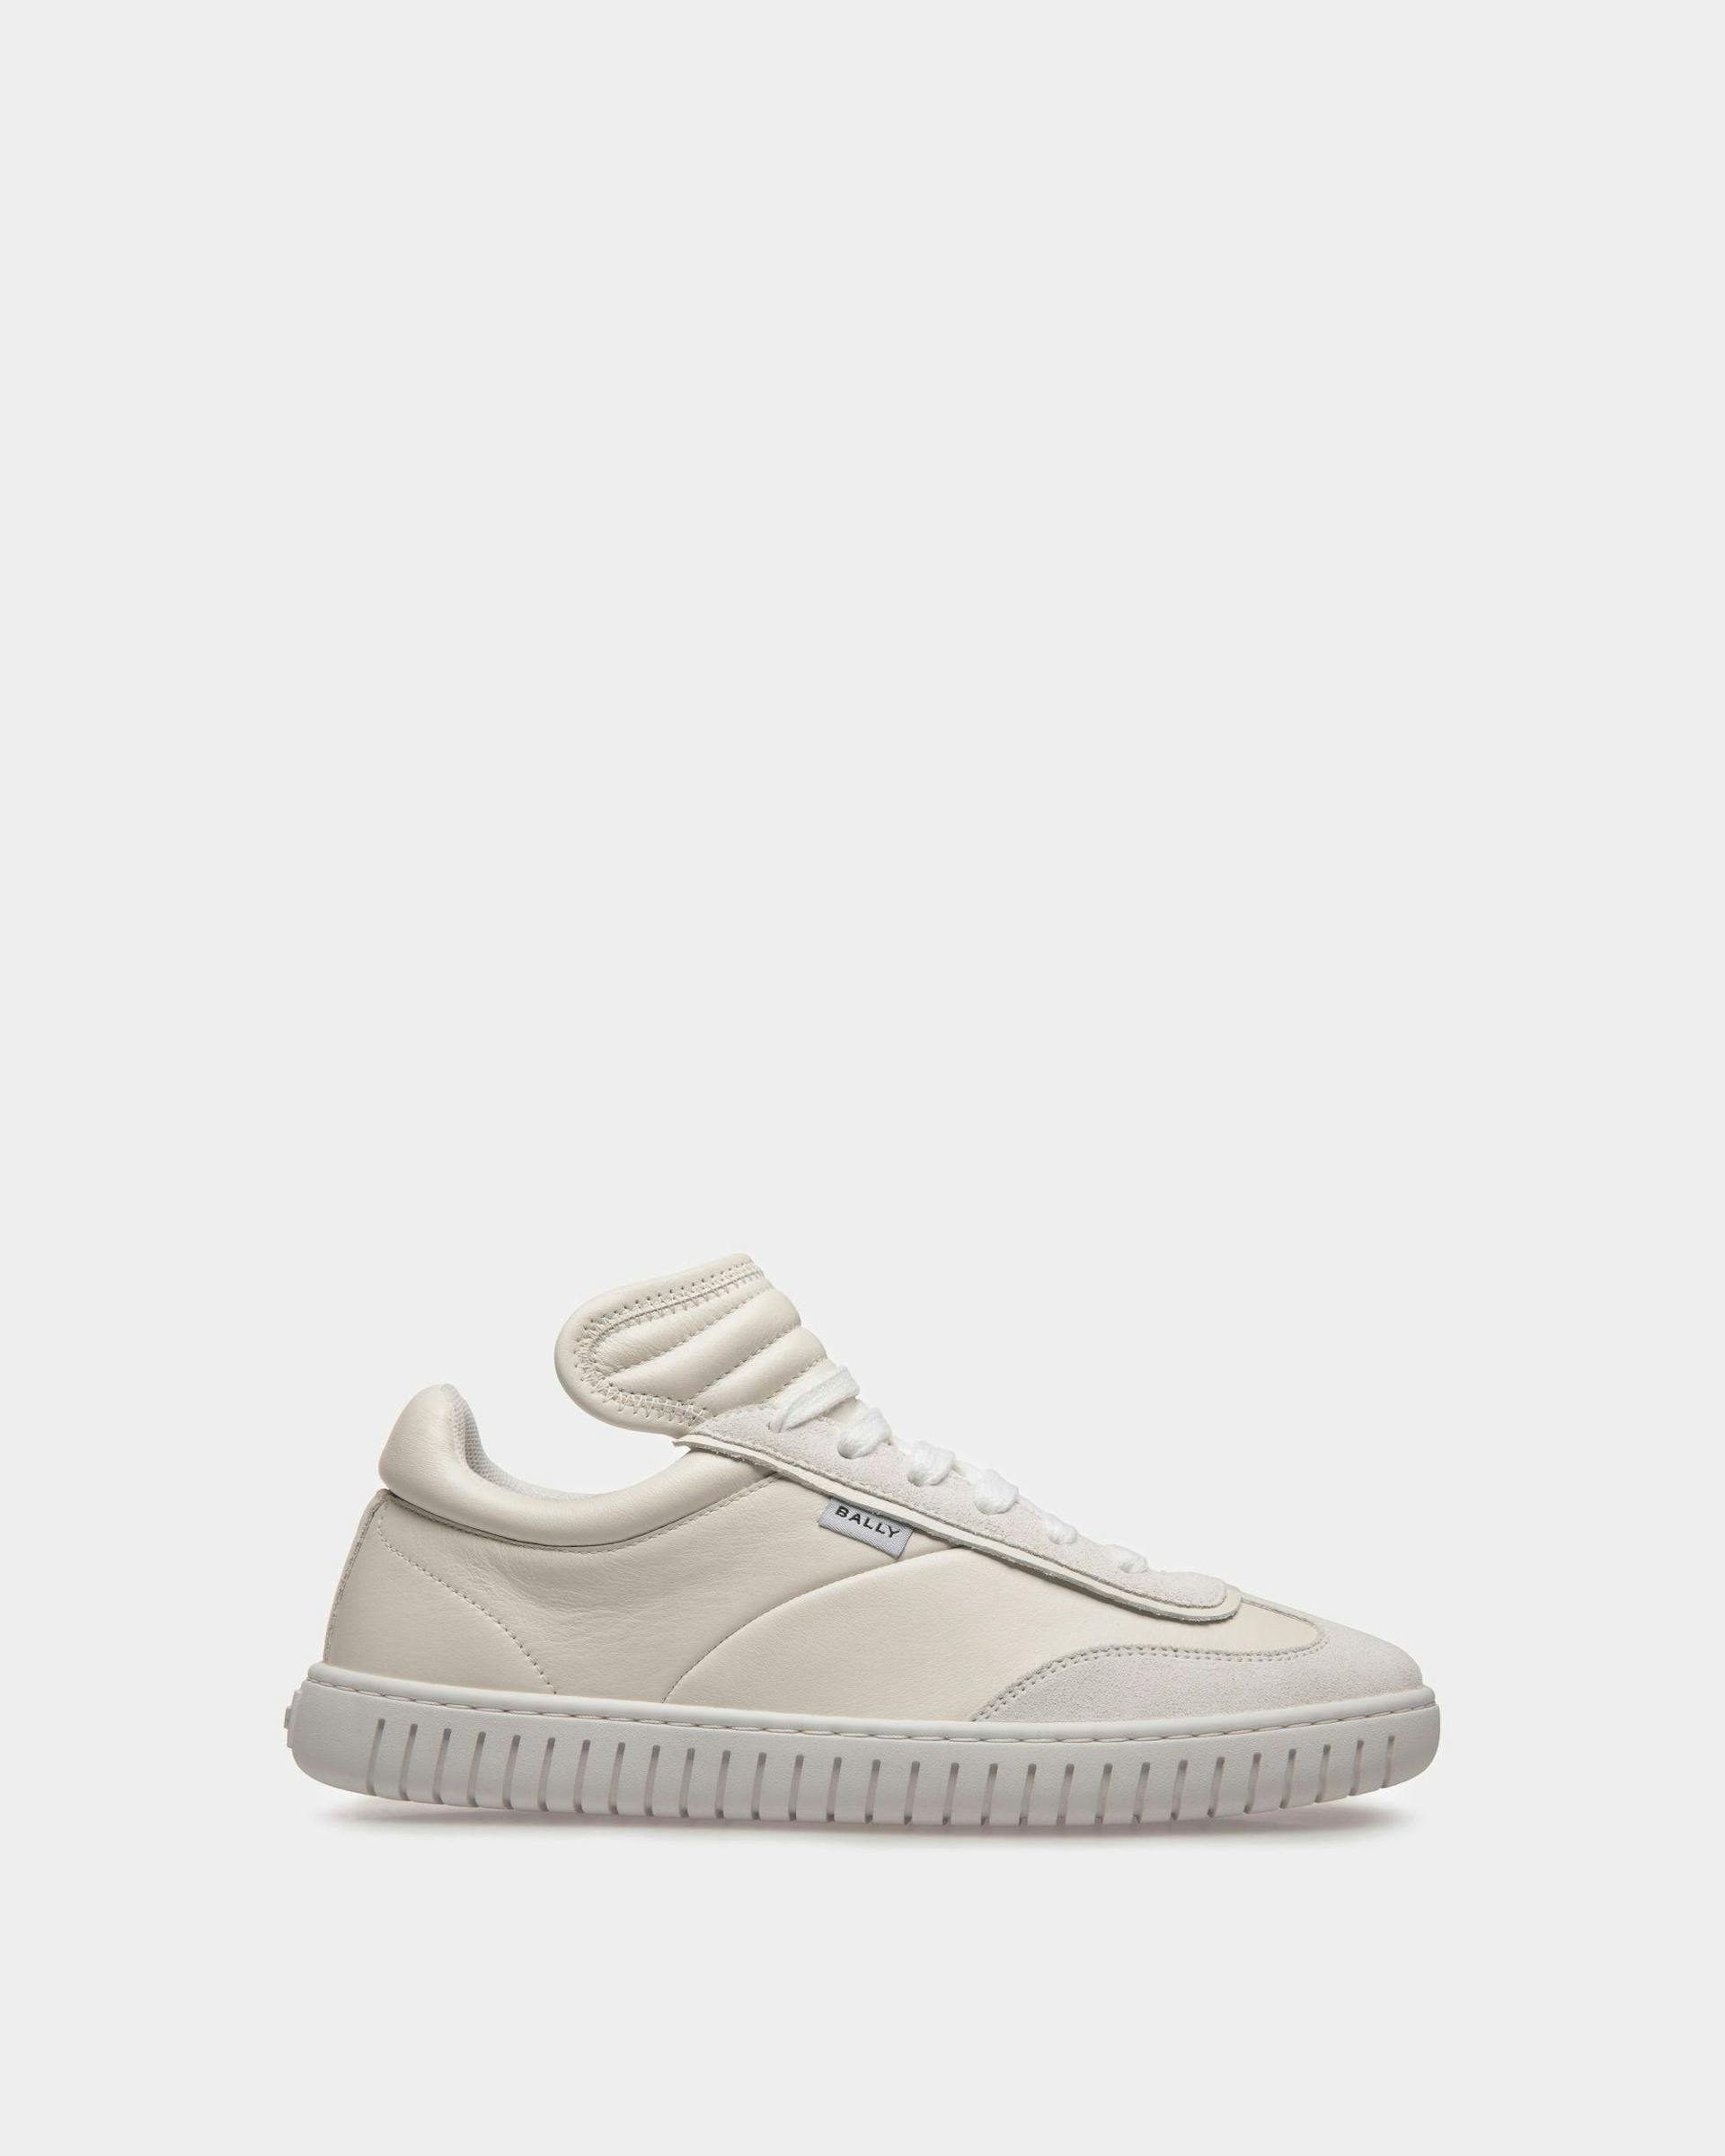 Sneaker Player In Pelle Bianca - Donna - Bally - 01